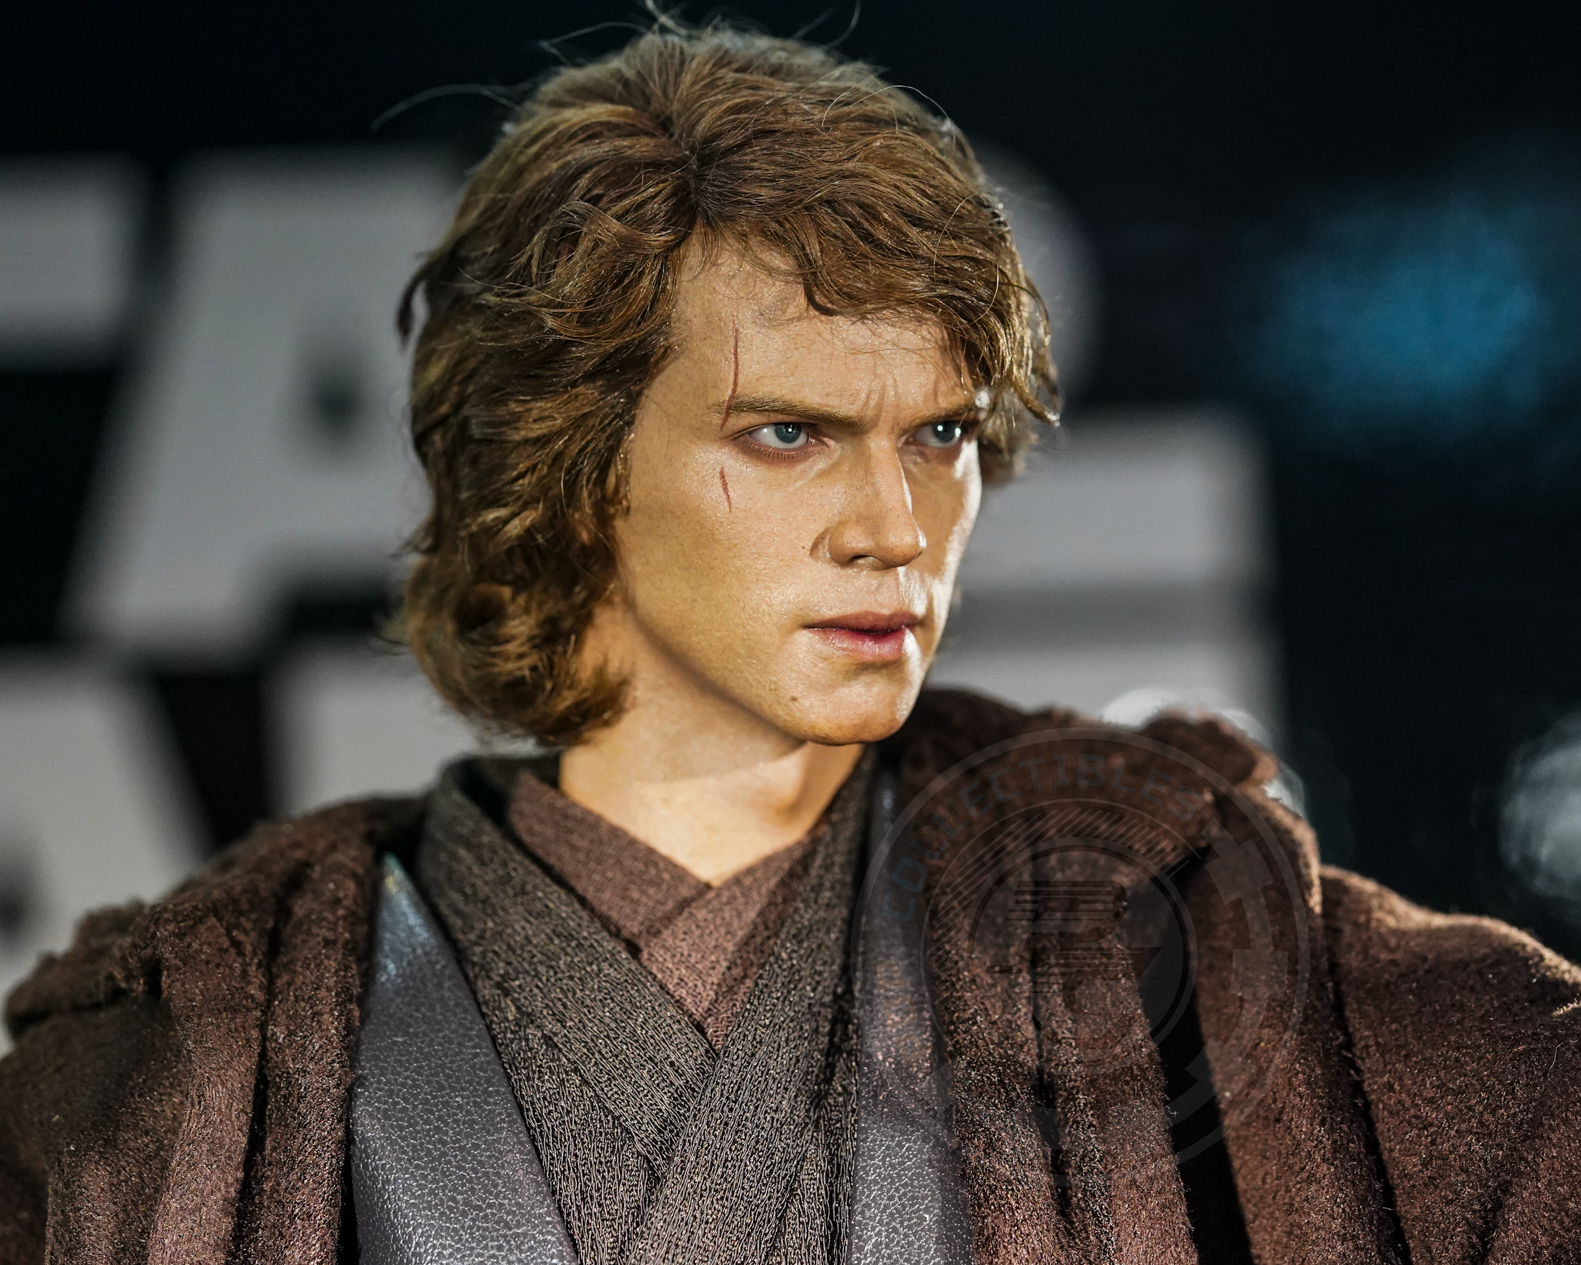 hottoys - NEW PRODUCT: HOT TOYS: STAR WARS EPISODE III: REVENGE OF THE SITH™ ANAKIN SKYWALKER™ 1/6TH SCALE COLLECTIBLE FIGURE - Page 7 DSC03930-2_1024x1024@2x